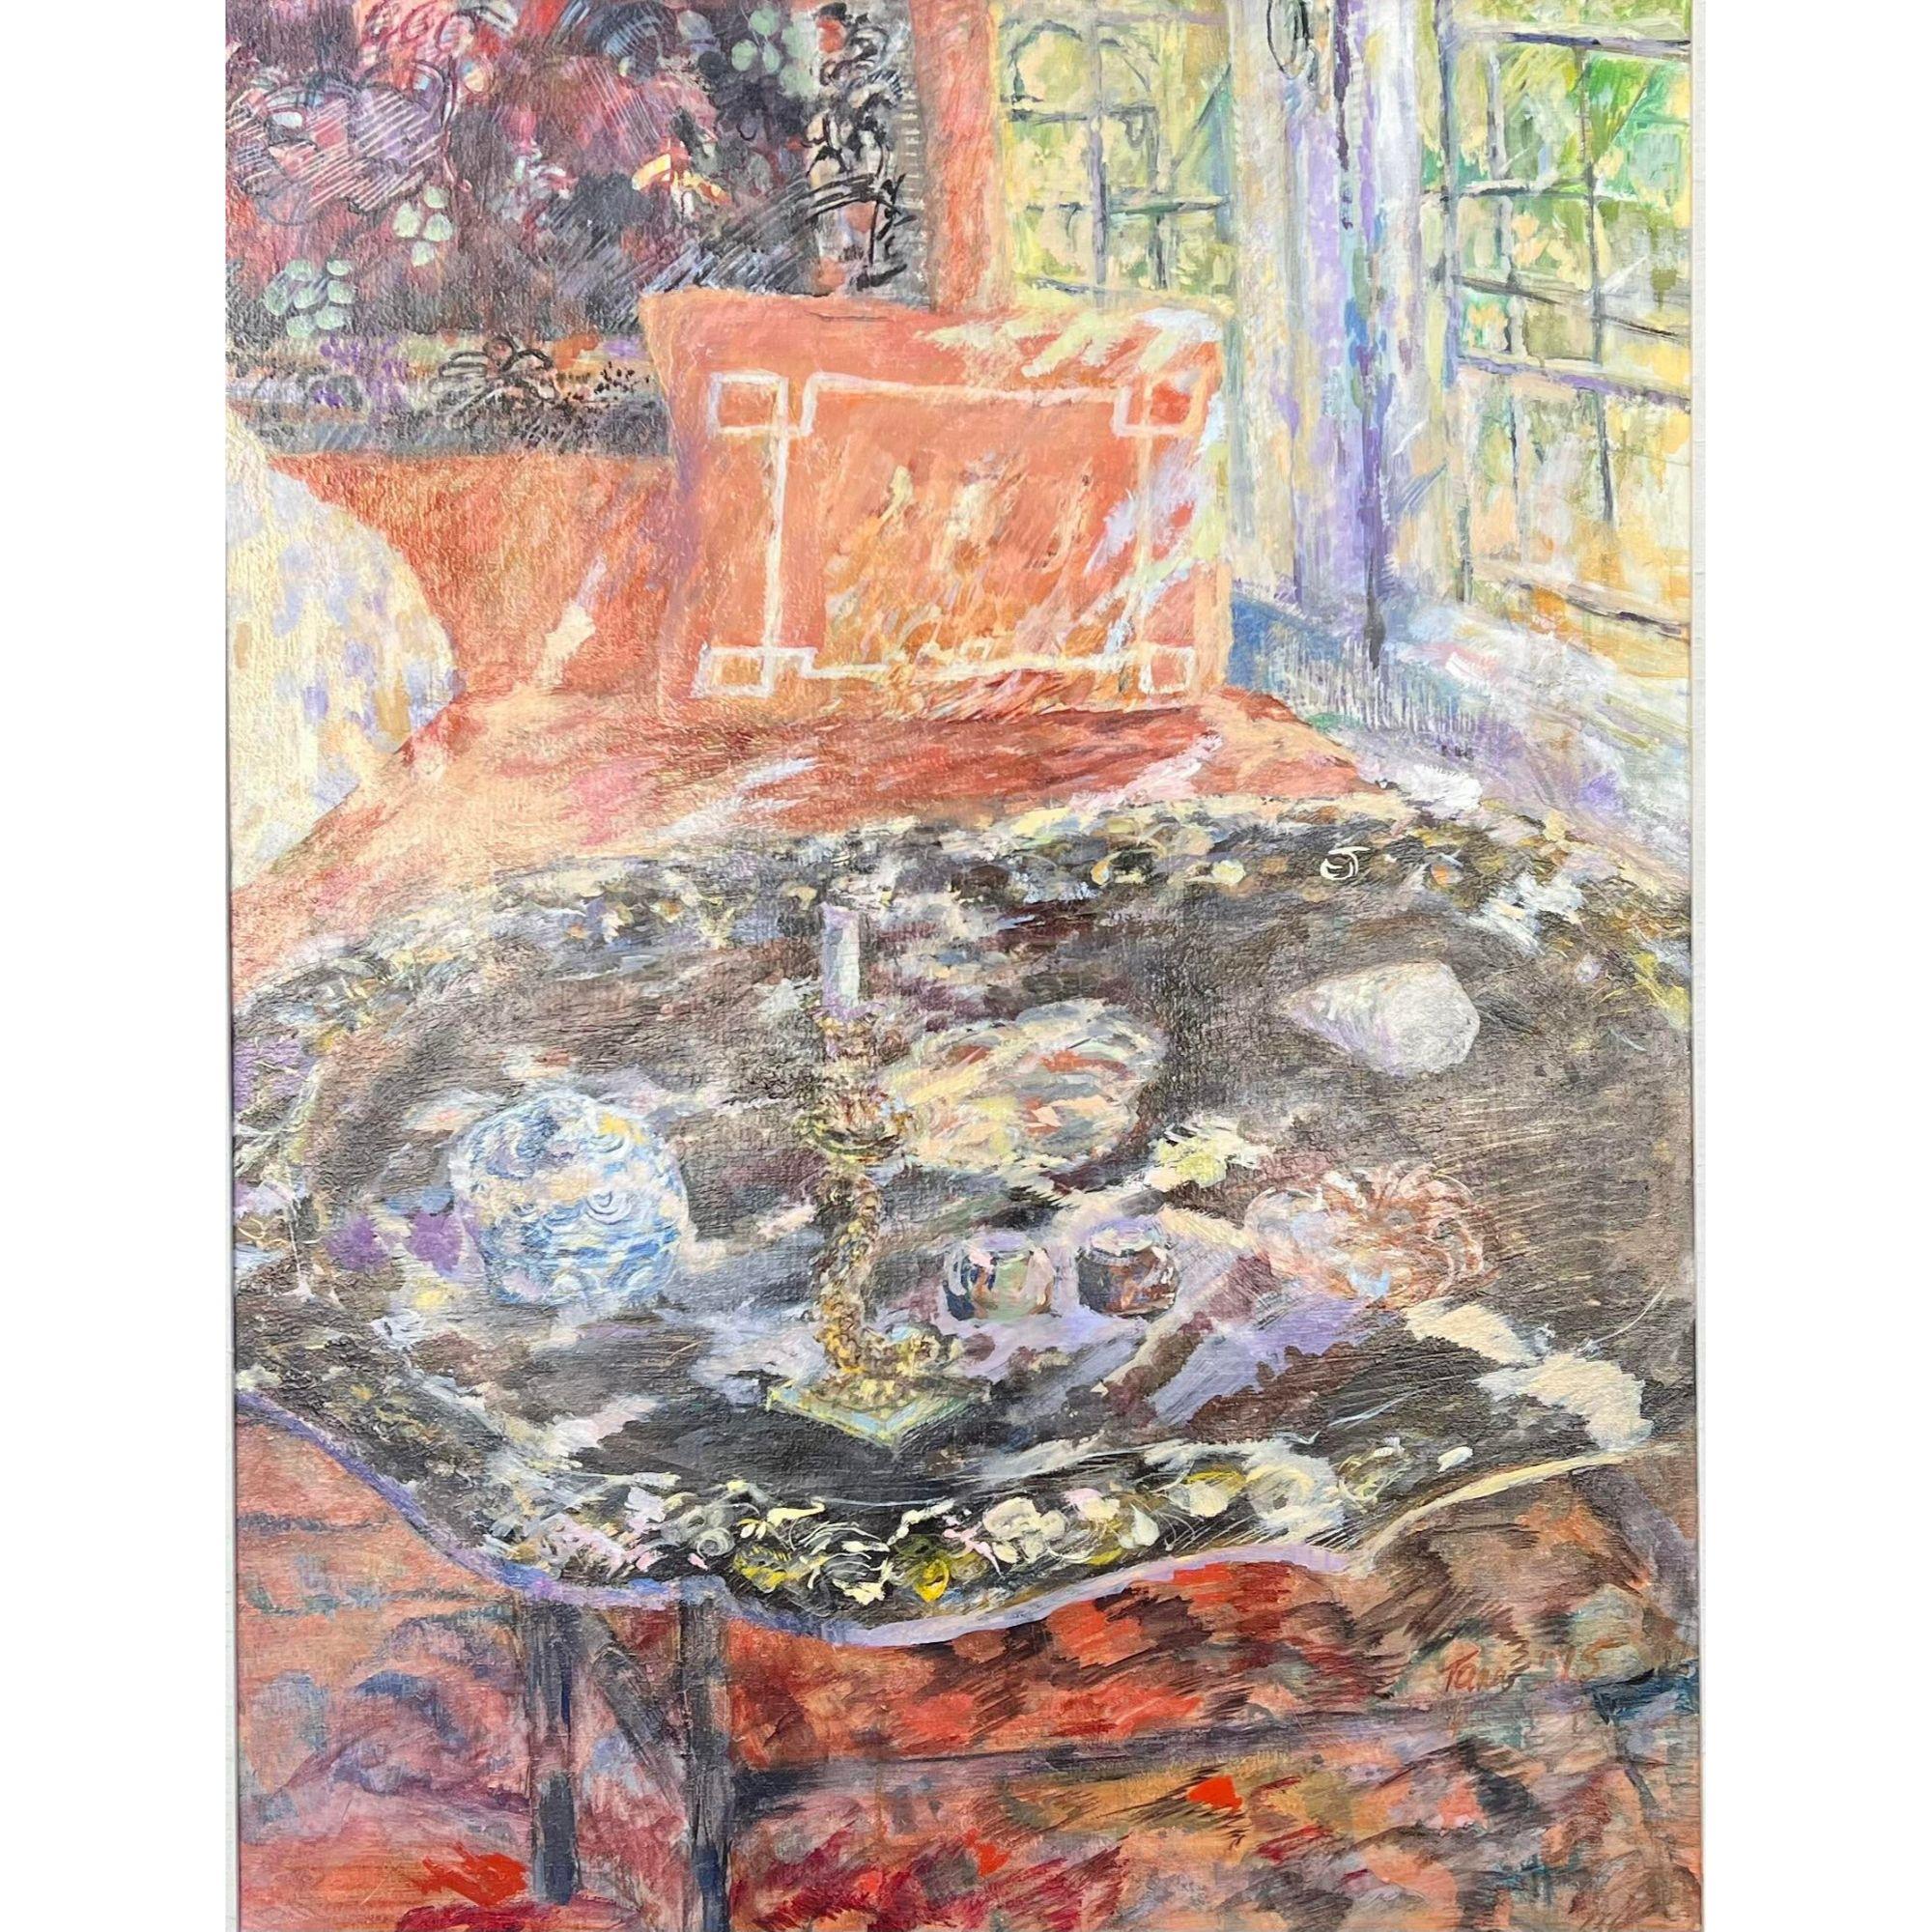 Modern original andrea tana expressionist oil painting of interior. Framed and matted.
Additional information:
Materials: Canvas, oil paint
Color: Red
Period: 1970s
Art Subjects: Interiors
Styles: Modern
Frame Type: Framed
Item Type: Vintage,